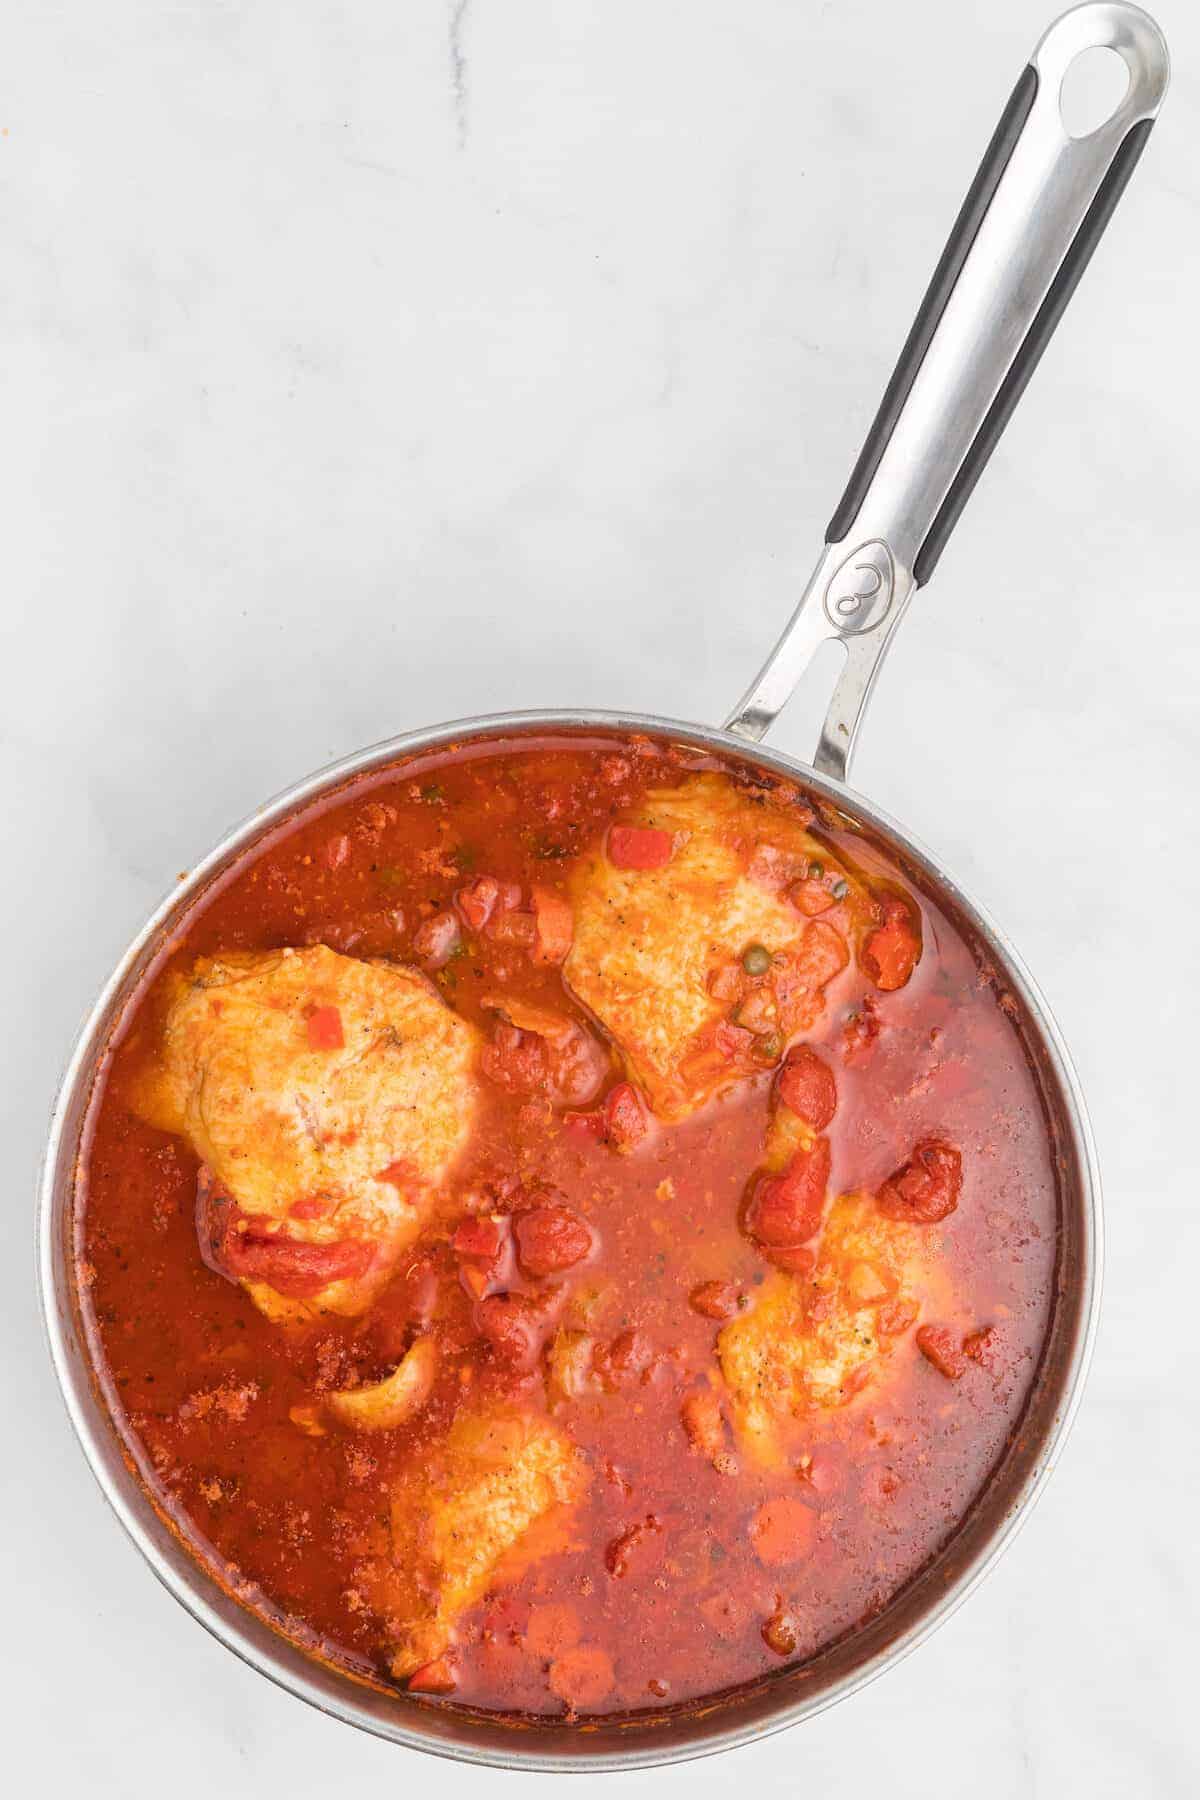 skillet with chicken pieces and tomato sauce.